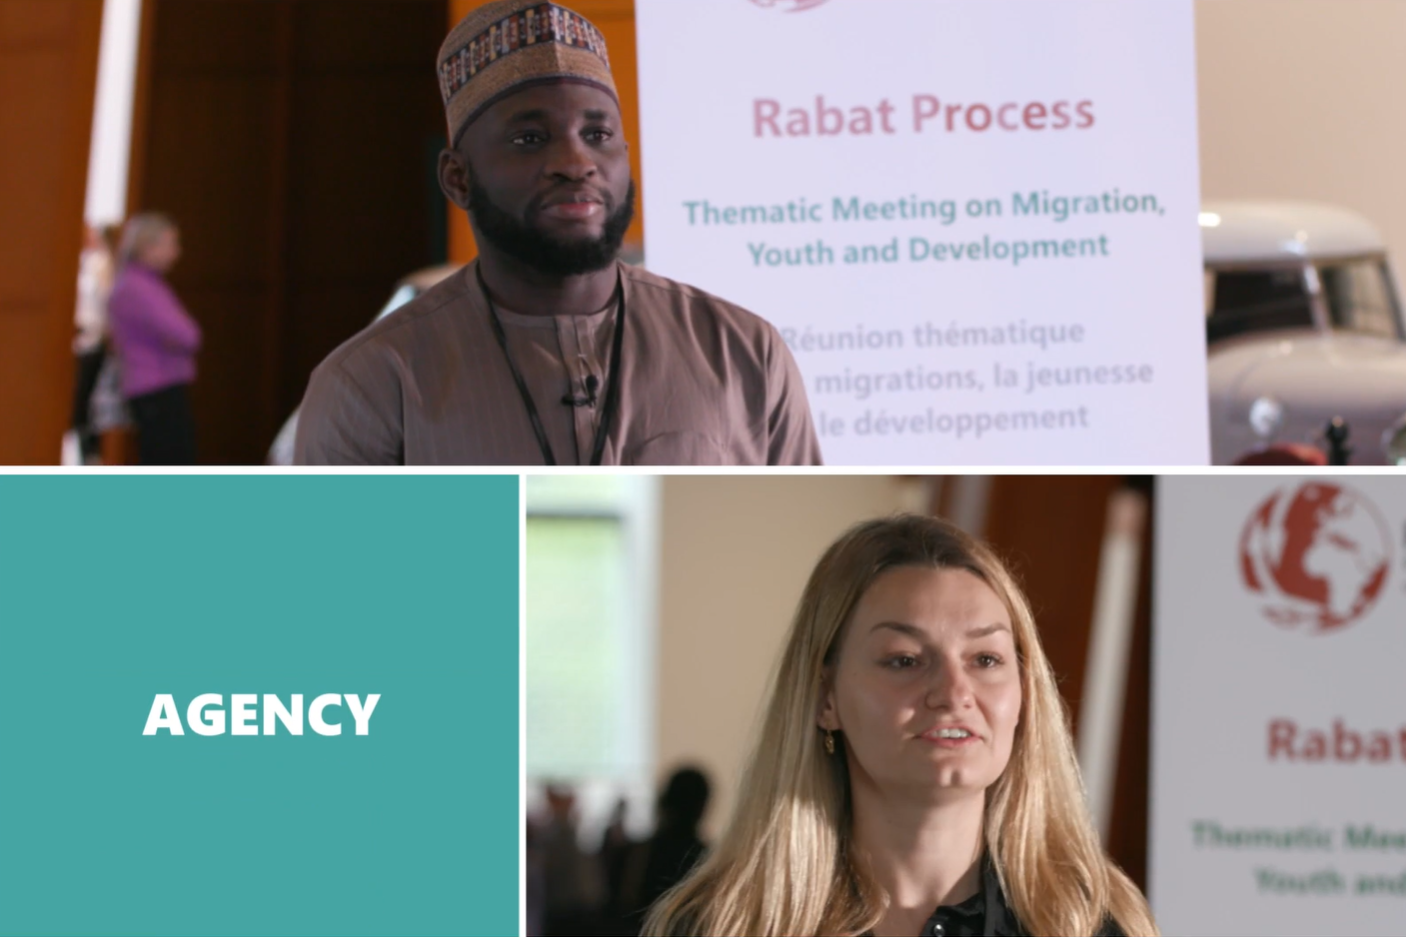 Video: Harnessing youth engagement for migration and development